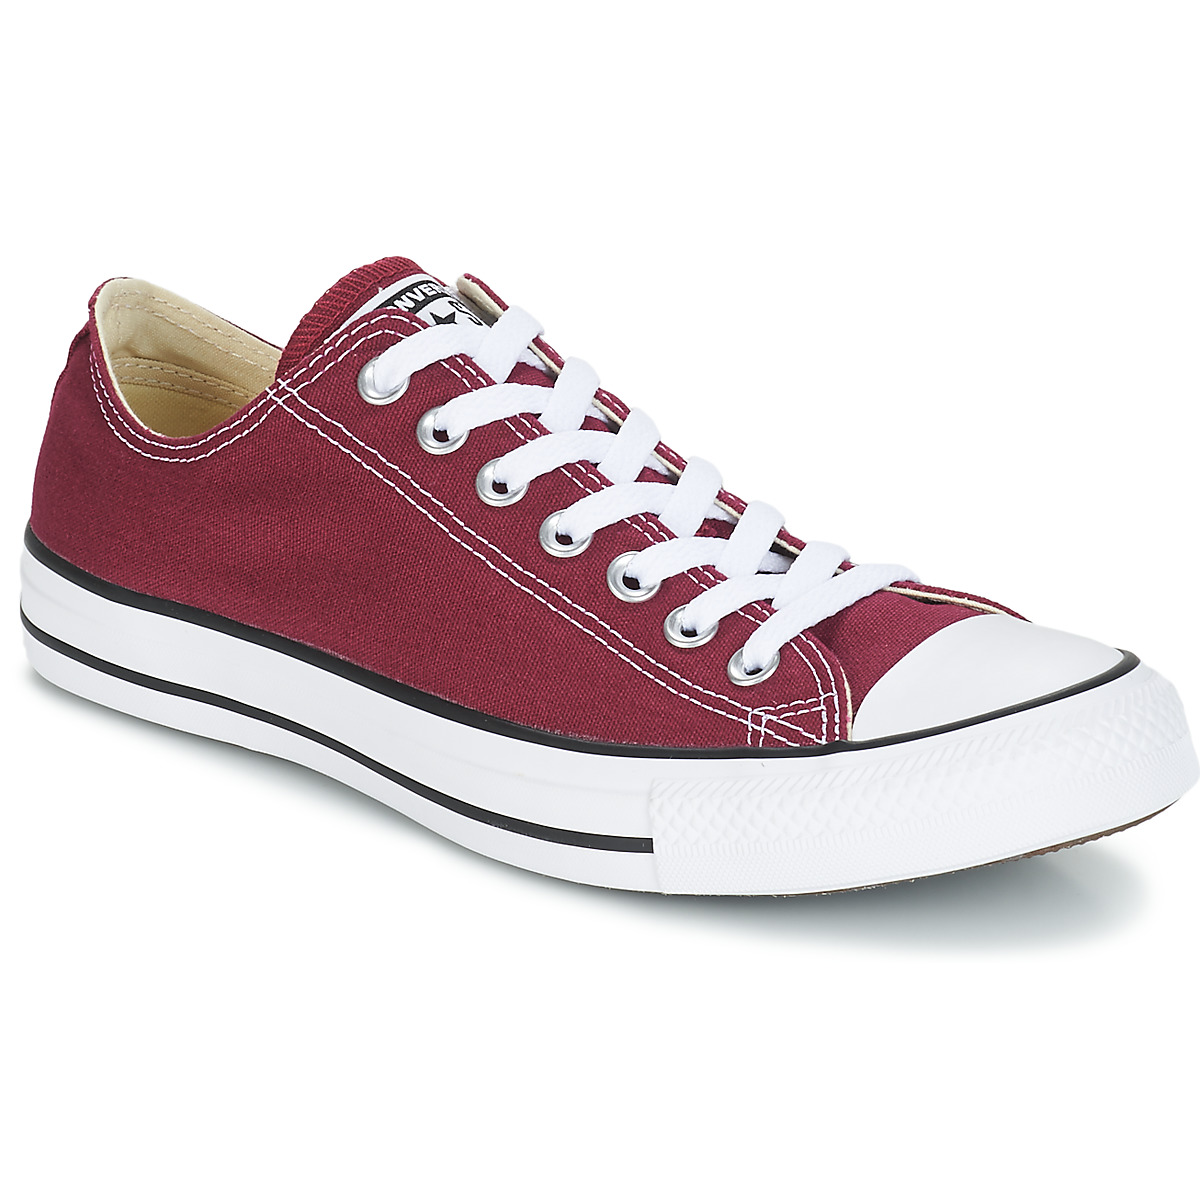 Converse ALL STAR OX Bordeaux - Free Delivery with Rubbersole.co.uk ! -  Shoes Low top trainers £ 46.99